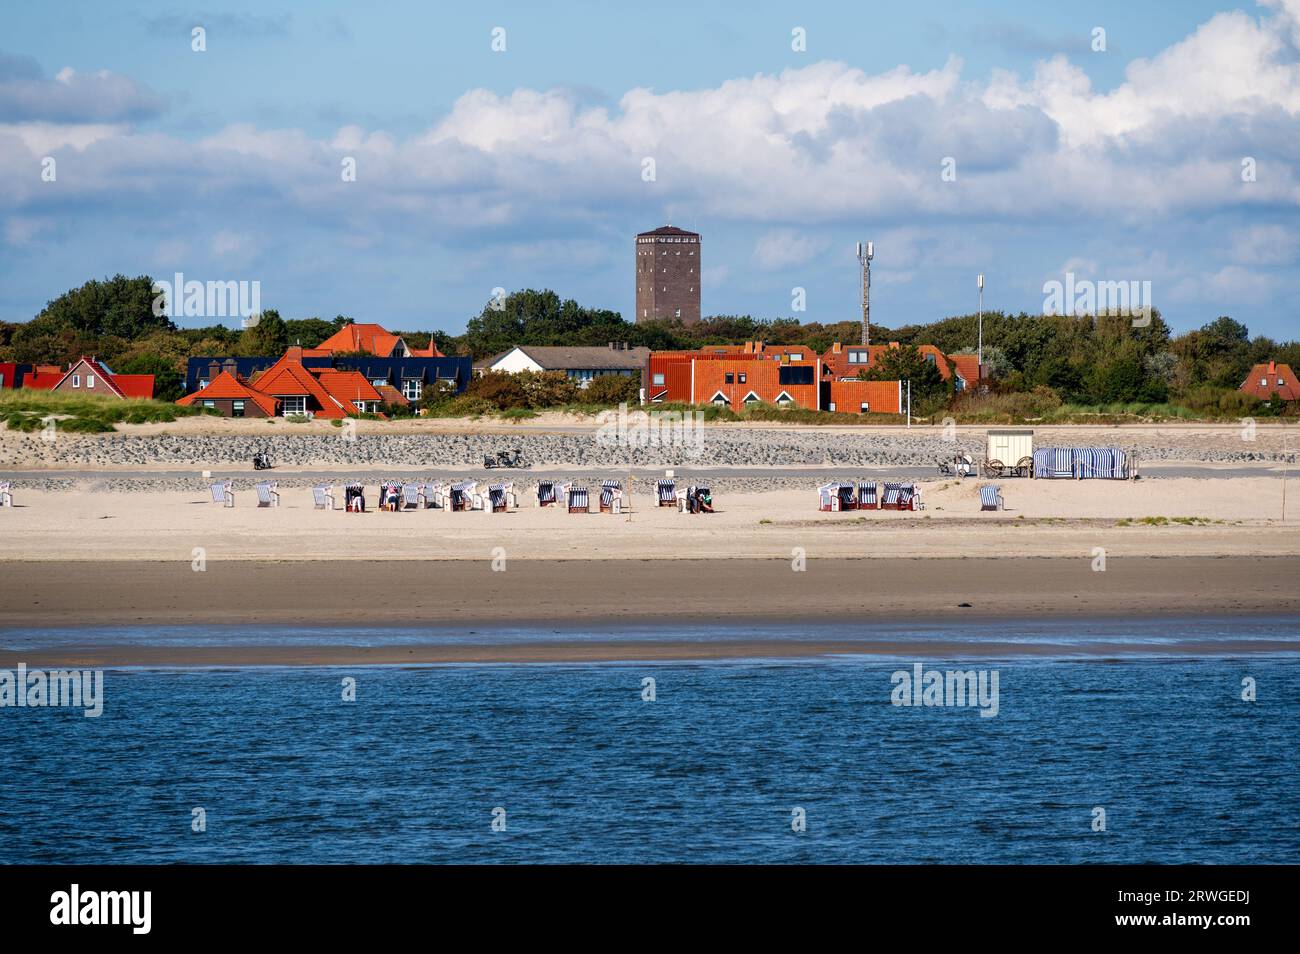 The water tower behind the beach on the North Sea island of Norderney Stock Photo